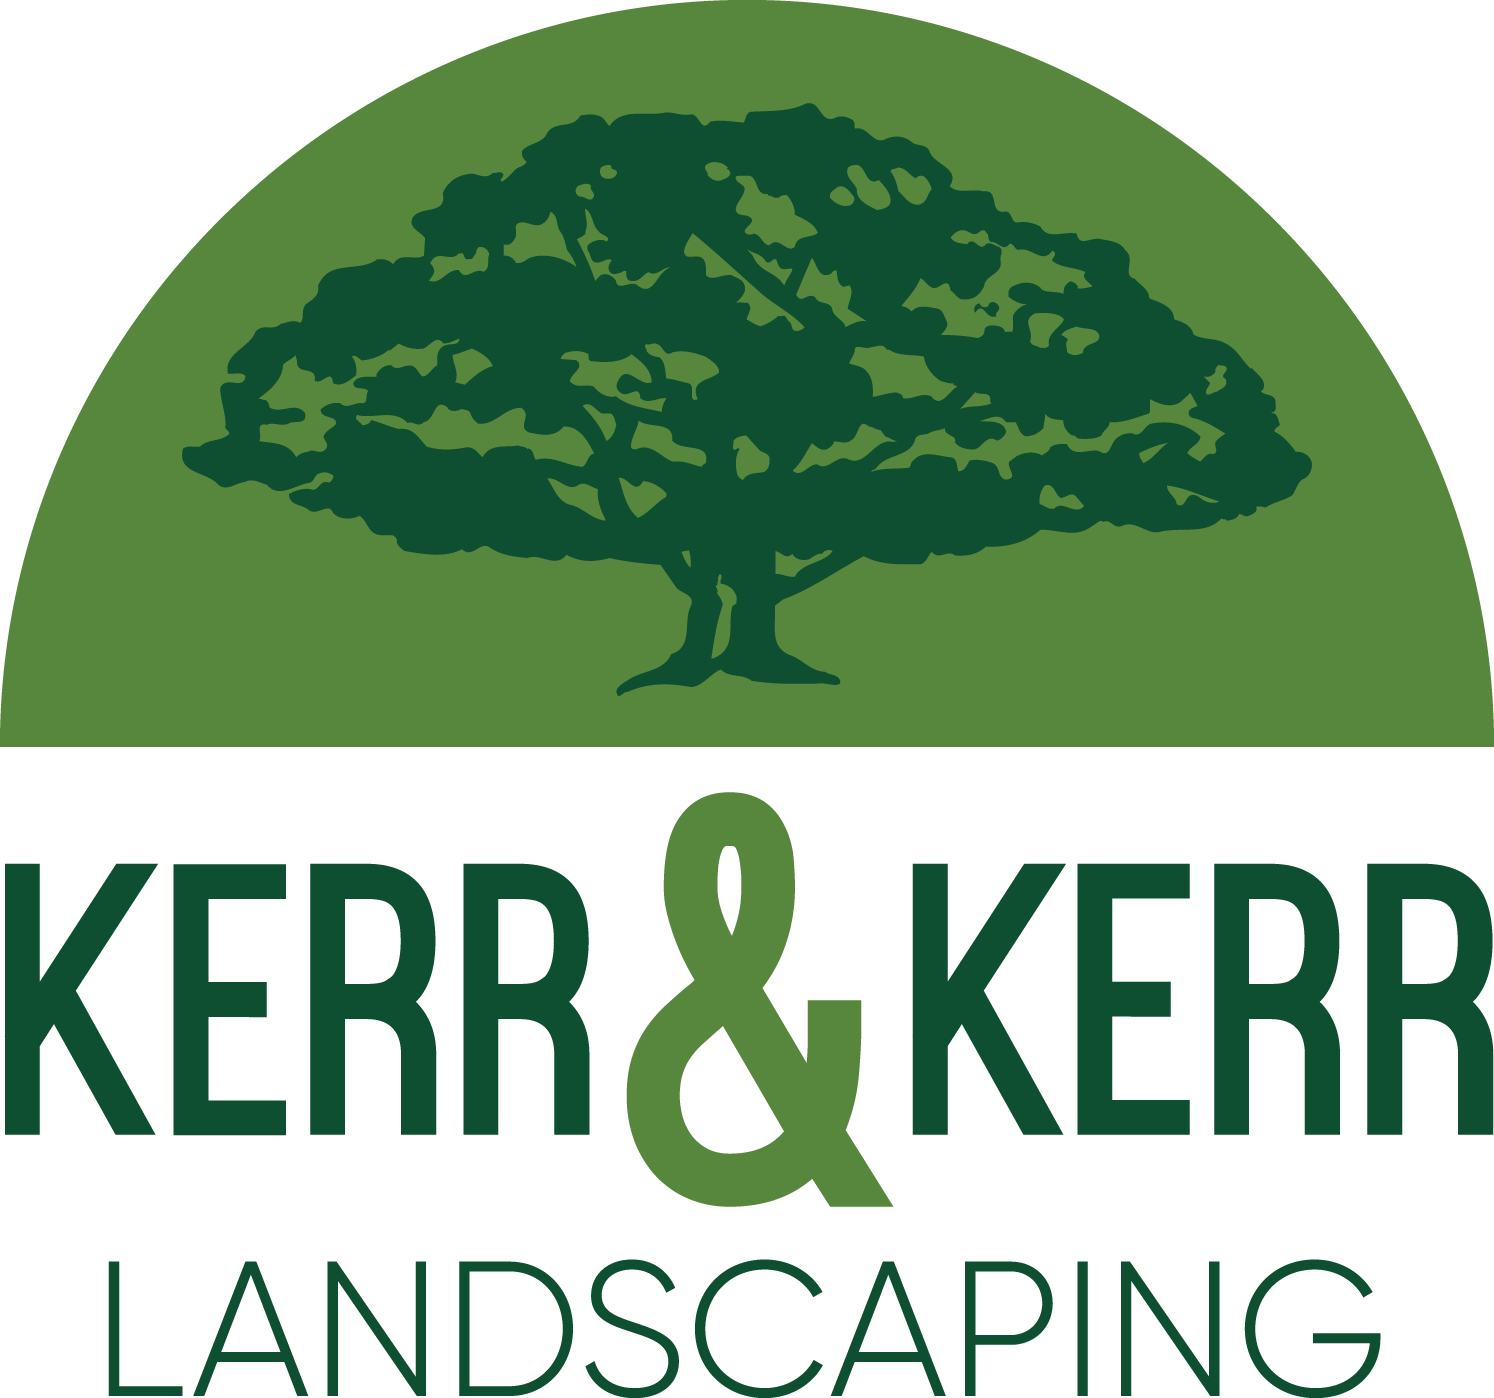 The image is a logo featuring a stylized tree within a semicircular shape above the text "KERR & KERR LANDSCAPING" in green on a transparent background.